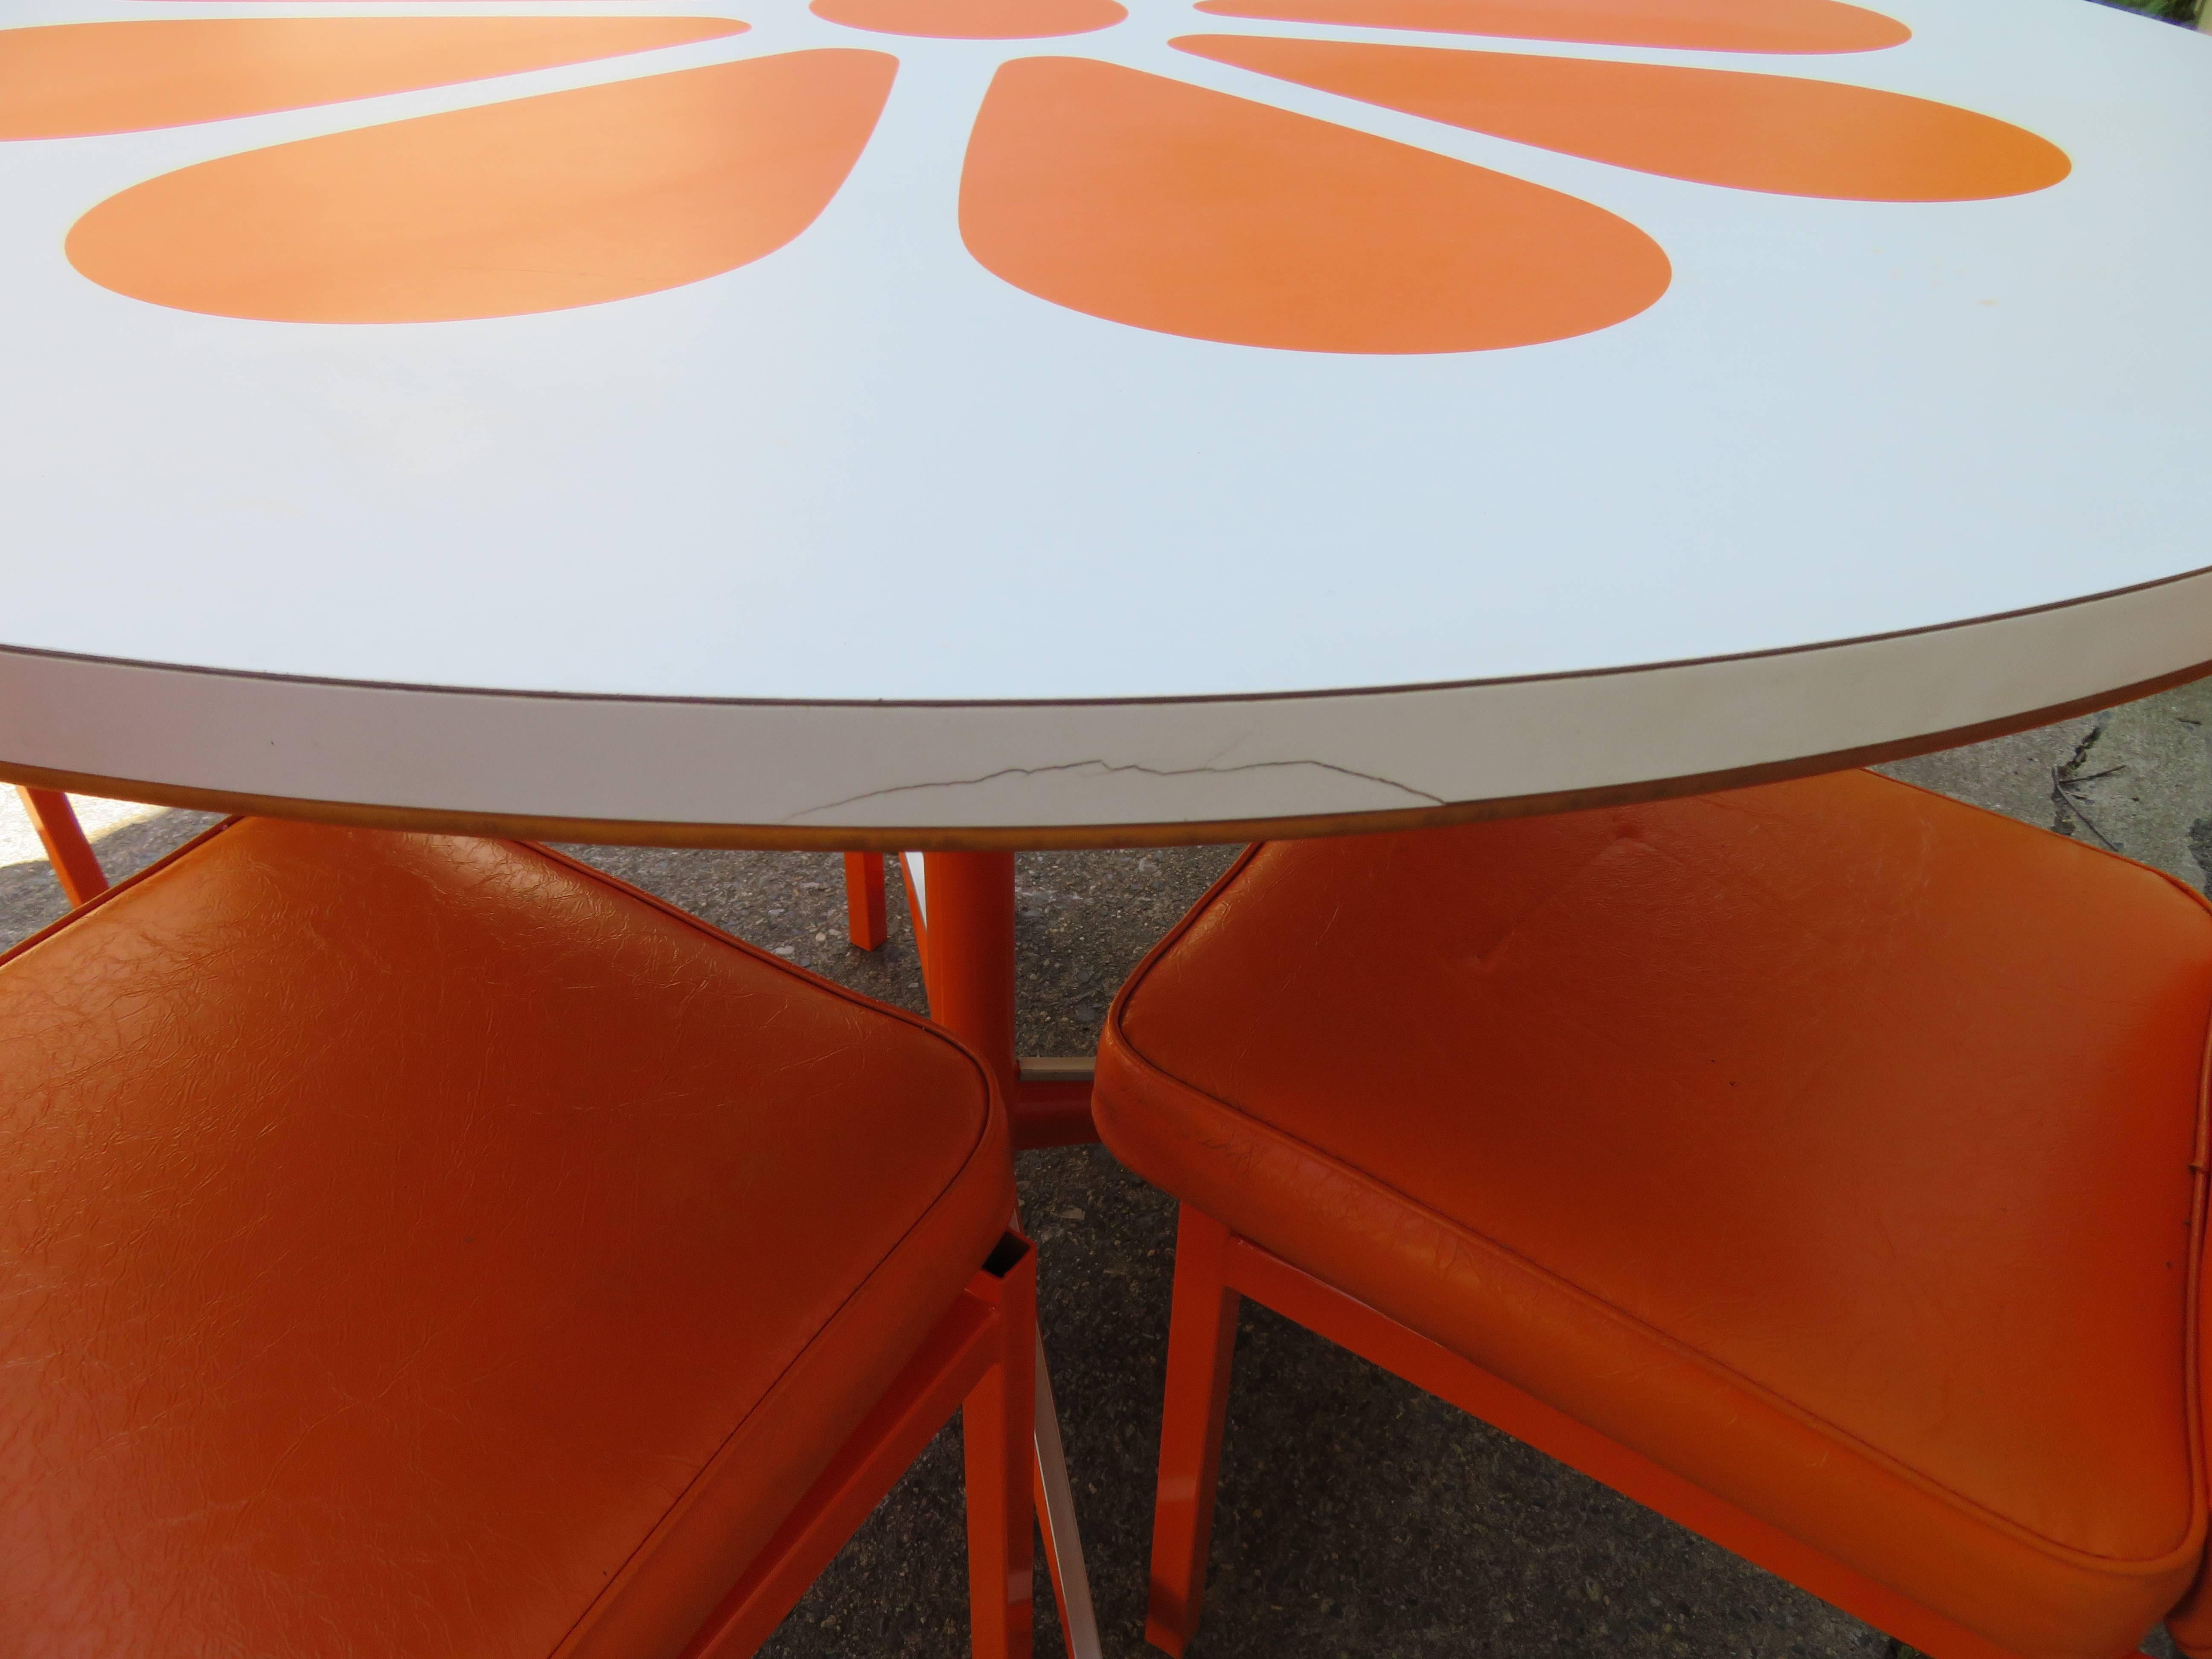 Mid-20th Century Fun Orange Slice 1960s Dining Table Four Chairs Probber Style Mid-Century Modern For Sale